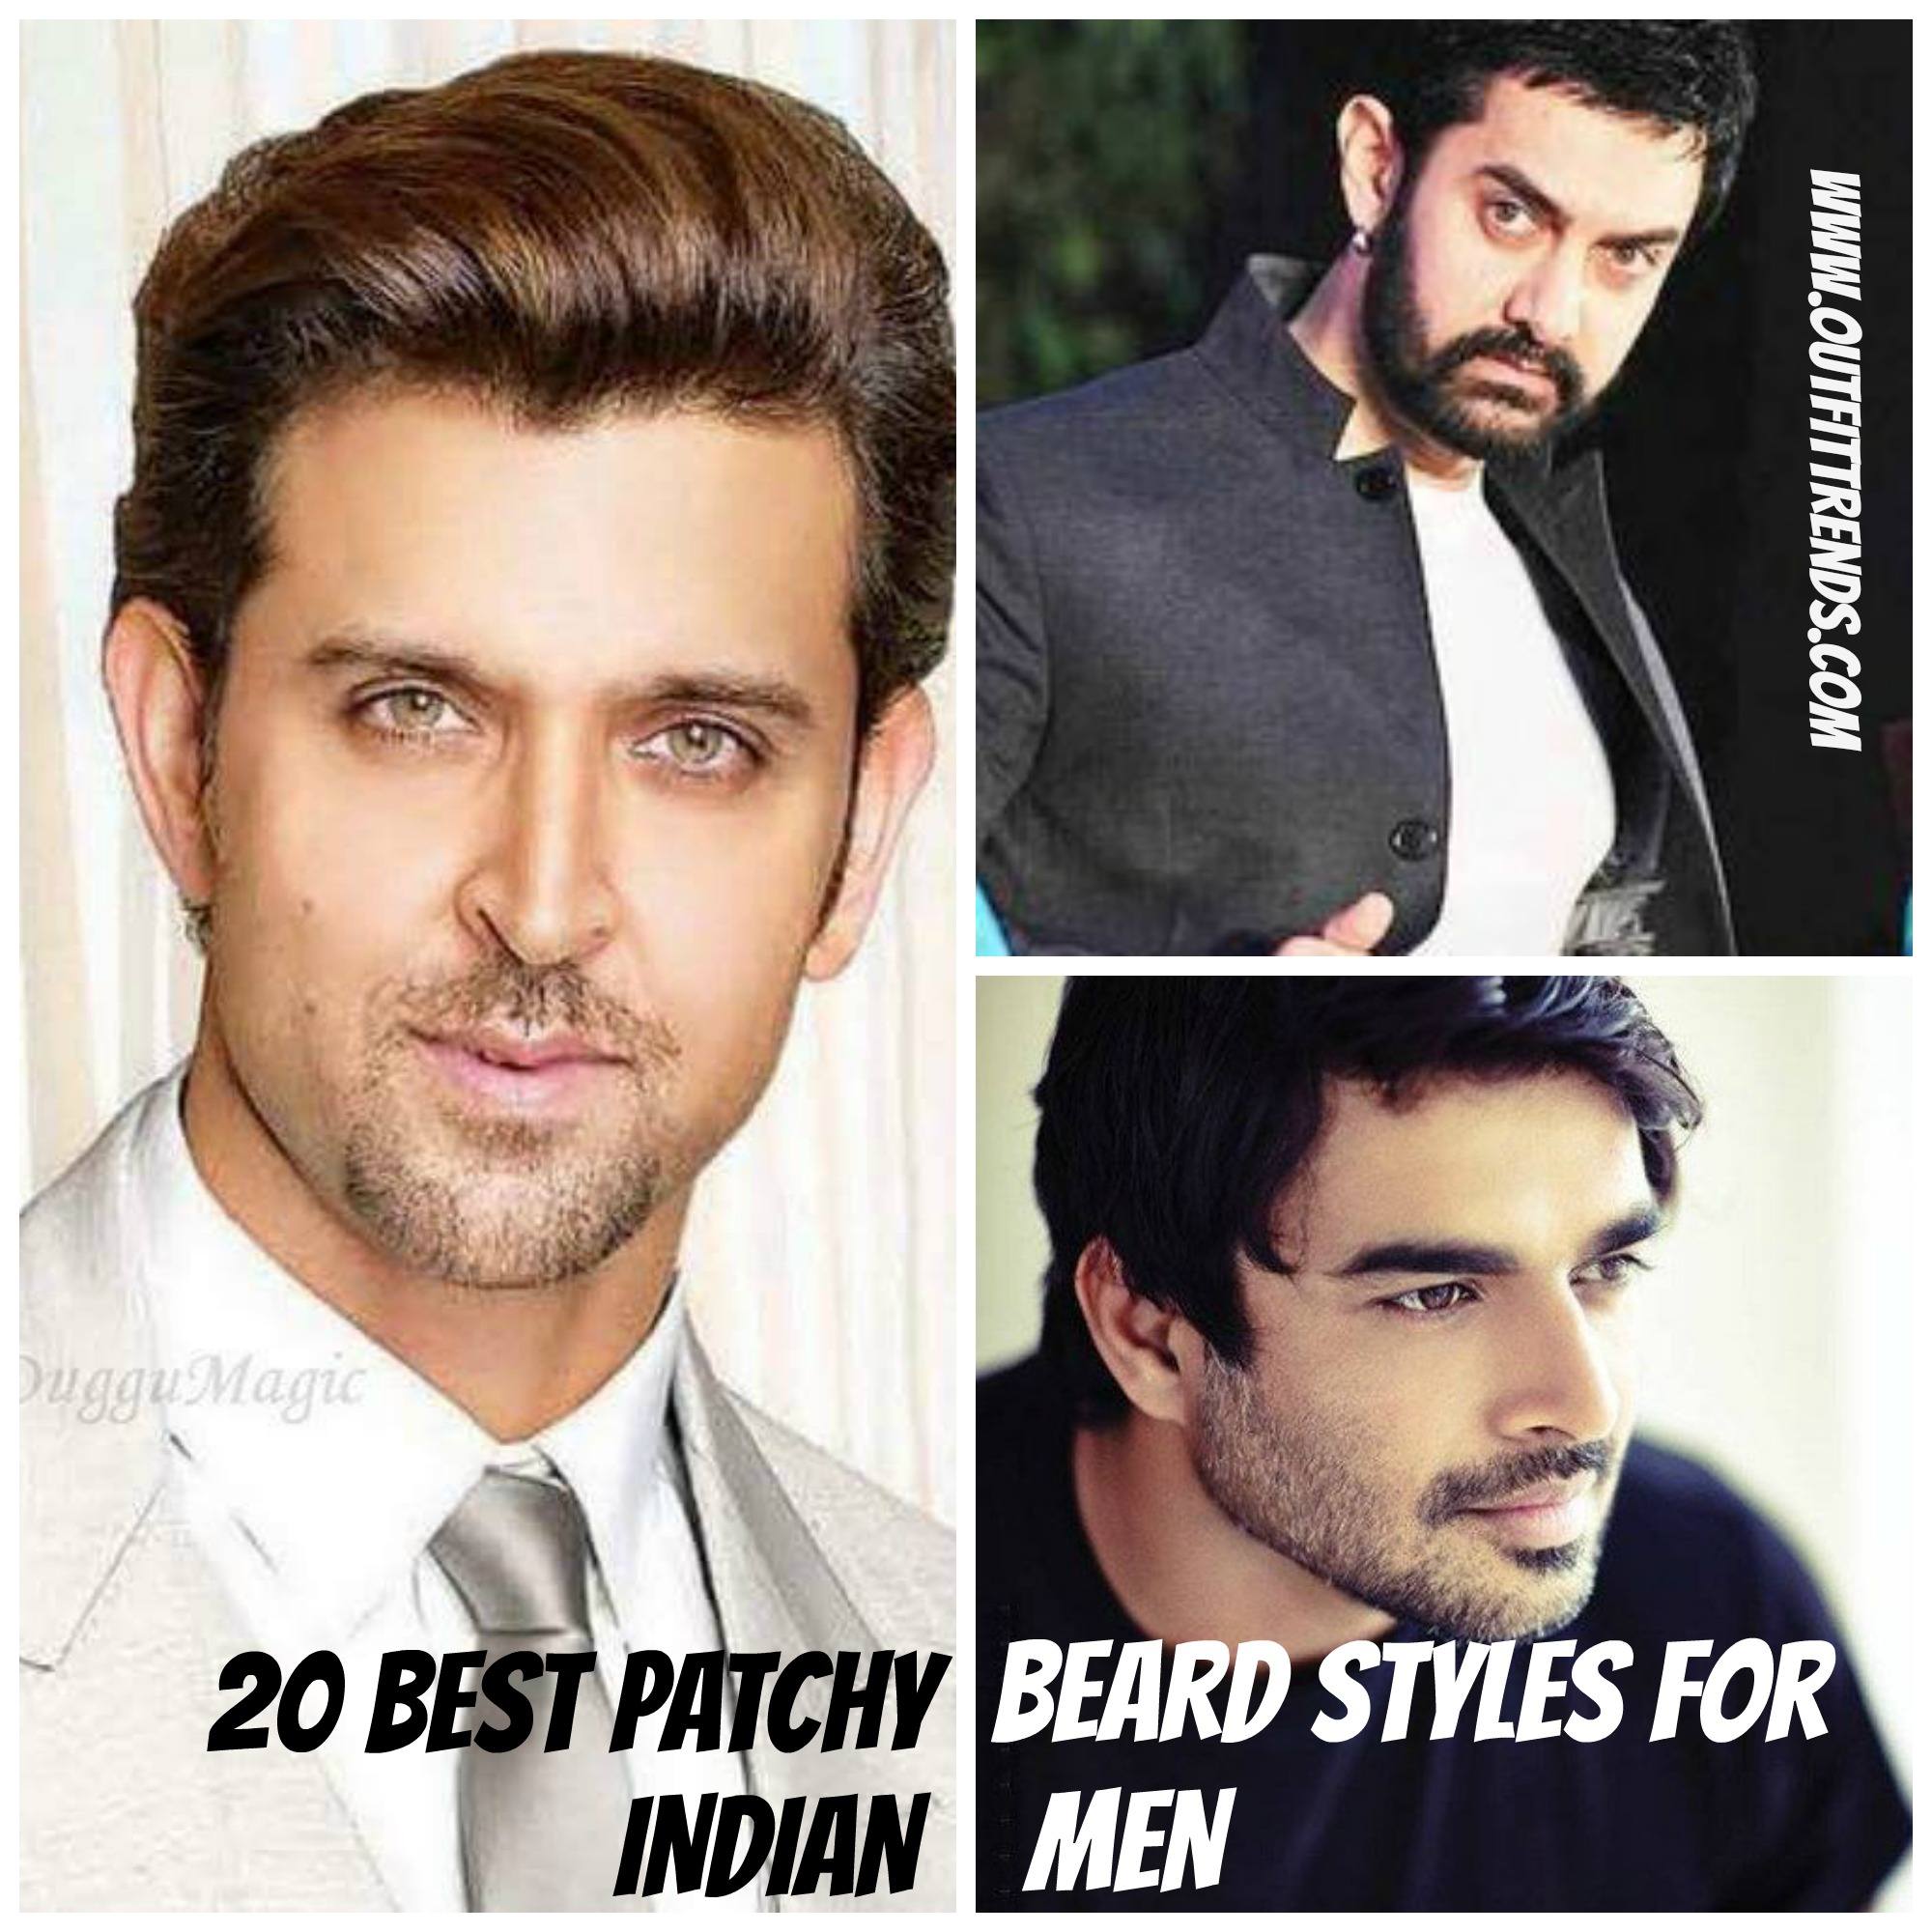 #20 Patchy Beard Styles For Indian Men | Tips & Styling Ideas